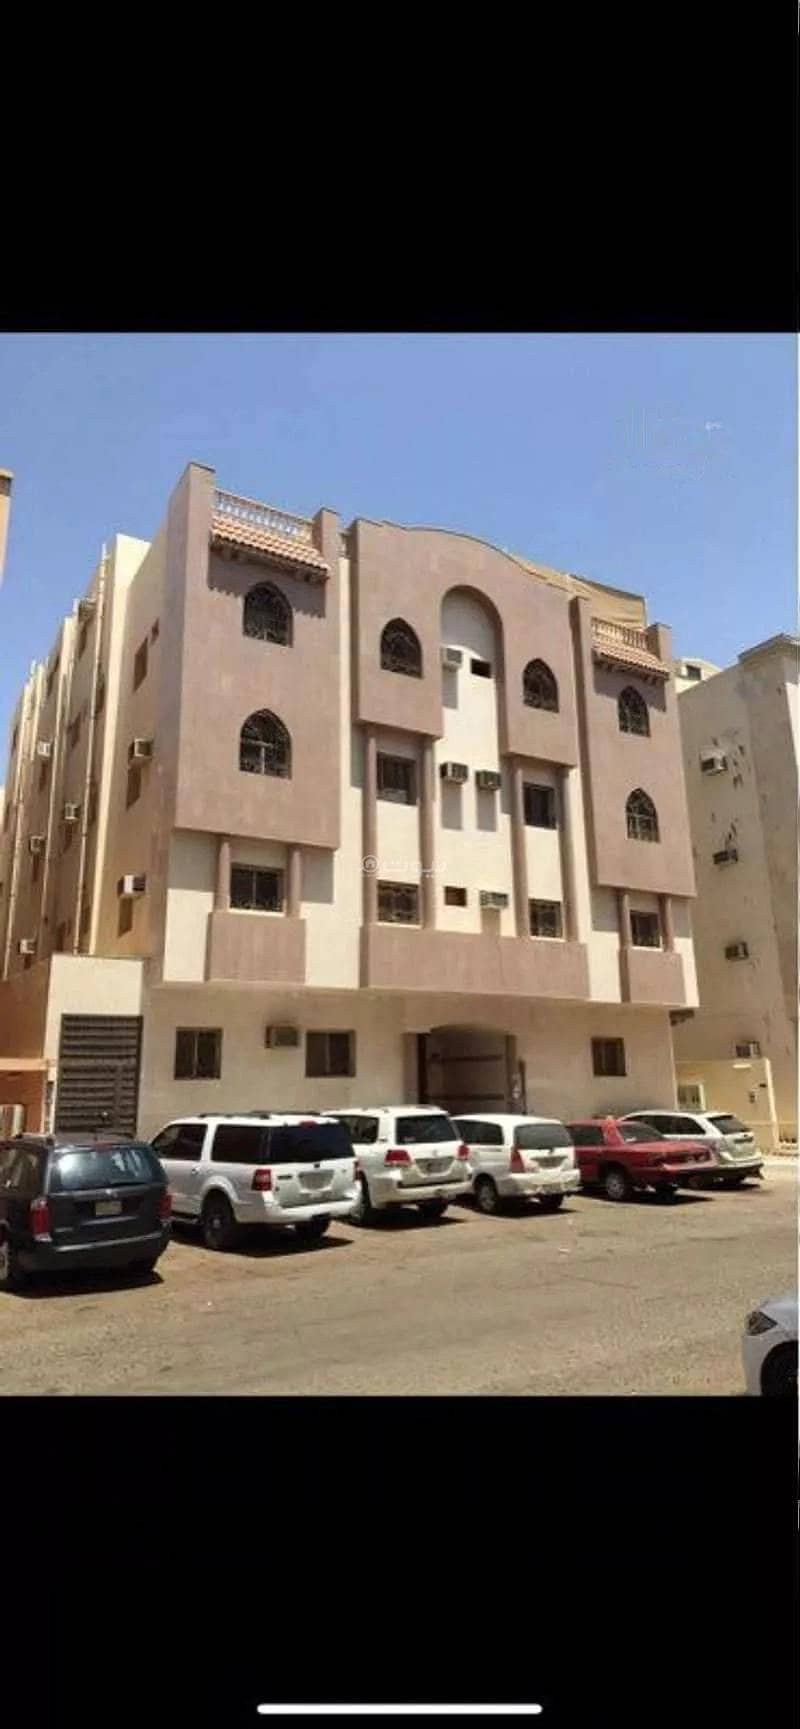 40-Room Residential Building For Sale, Al Areed, Al Madinah